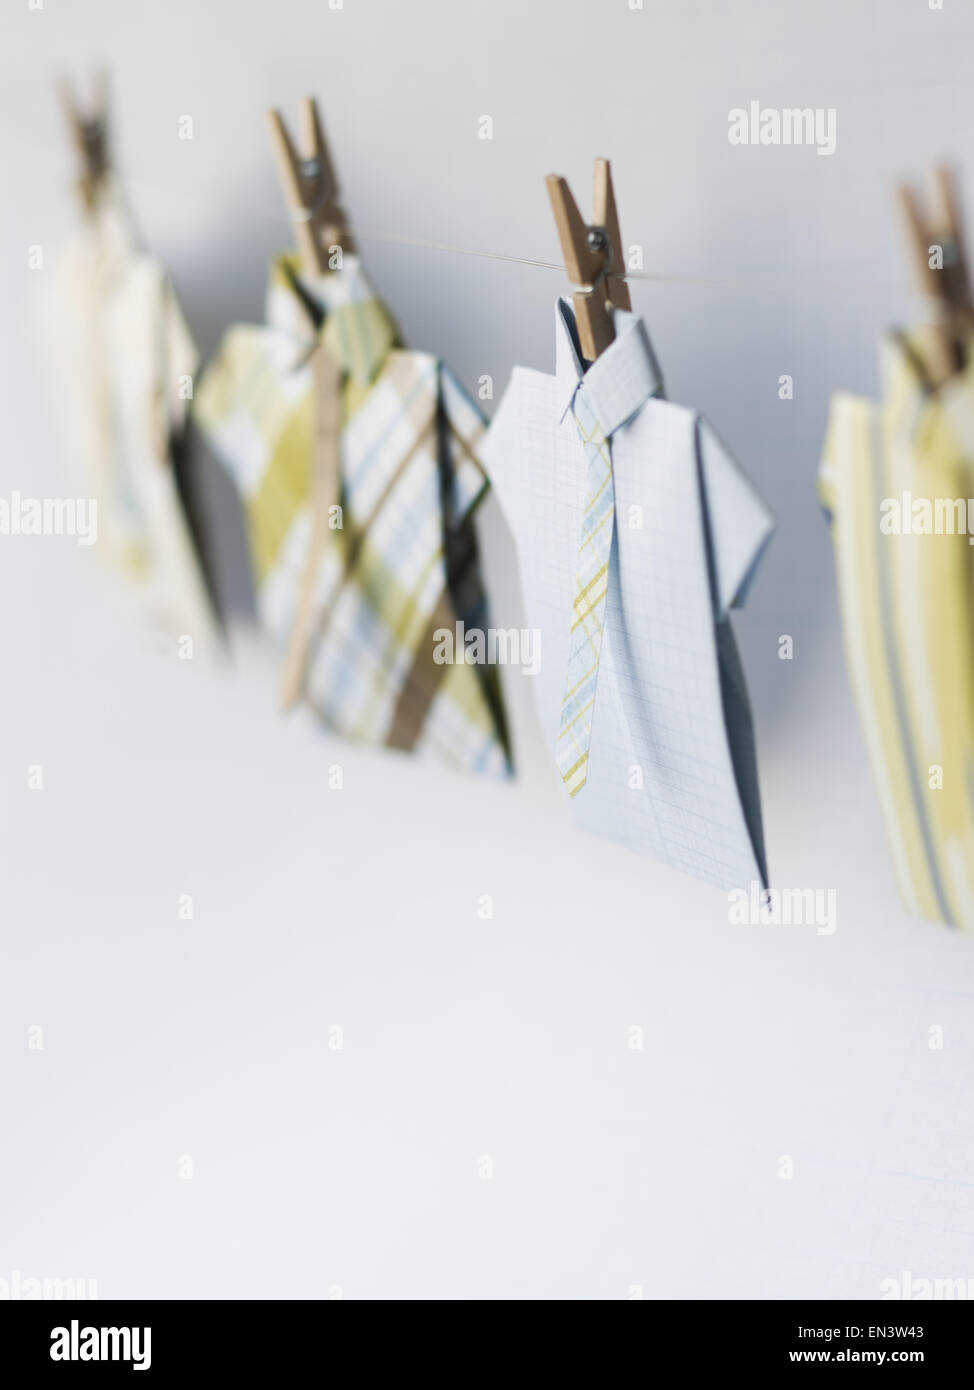 Dress shirts on clothesline with clothes pegs Stock Photo